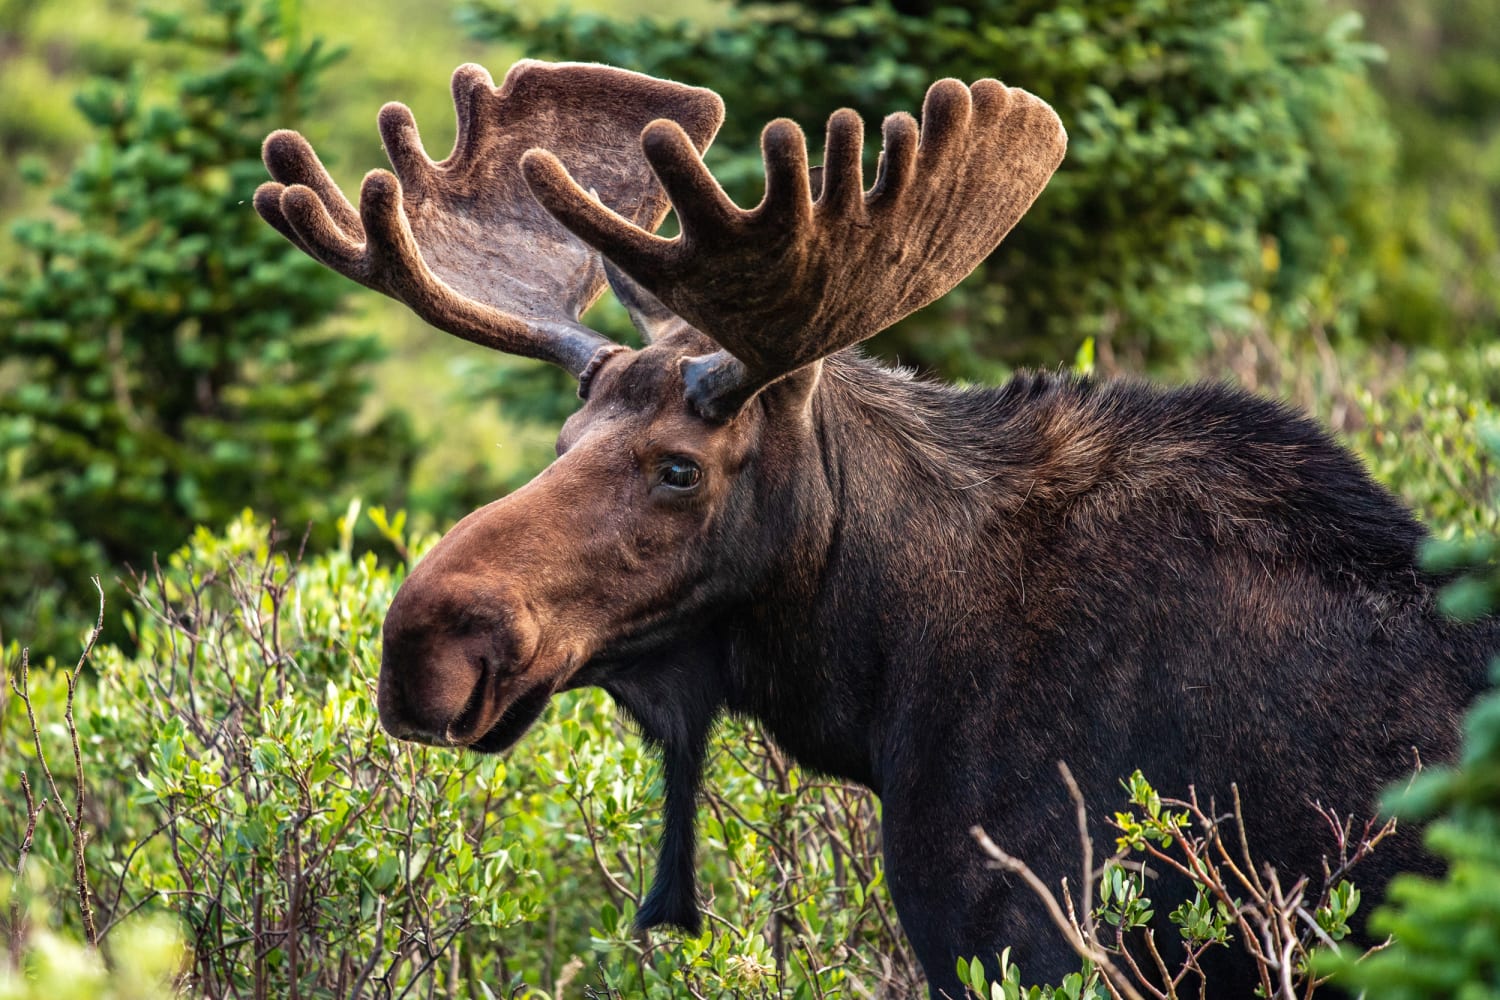 Moose killed by environmental officials after wandering onto Connecticut airport grounds